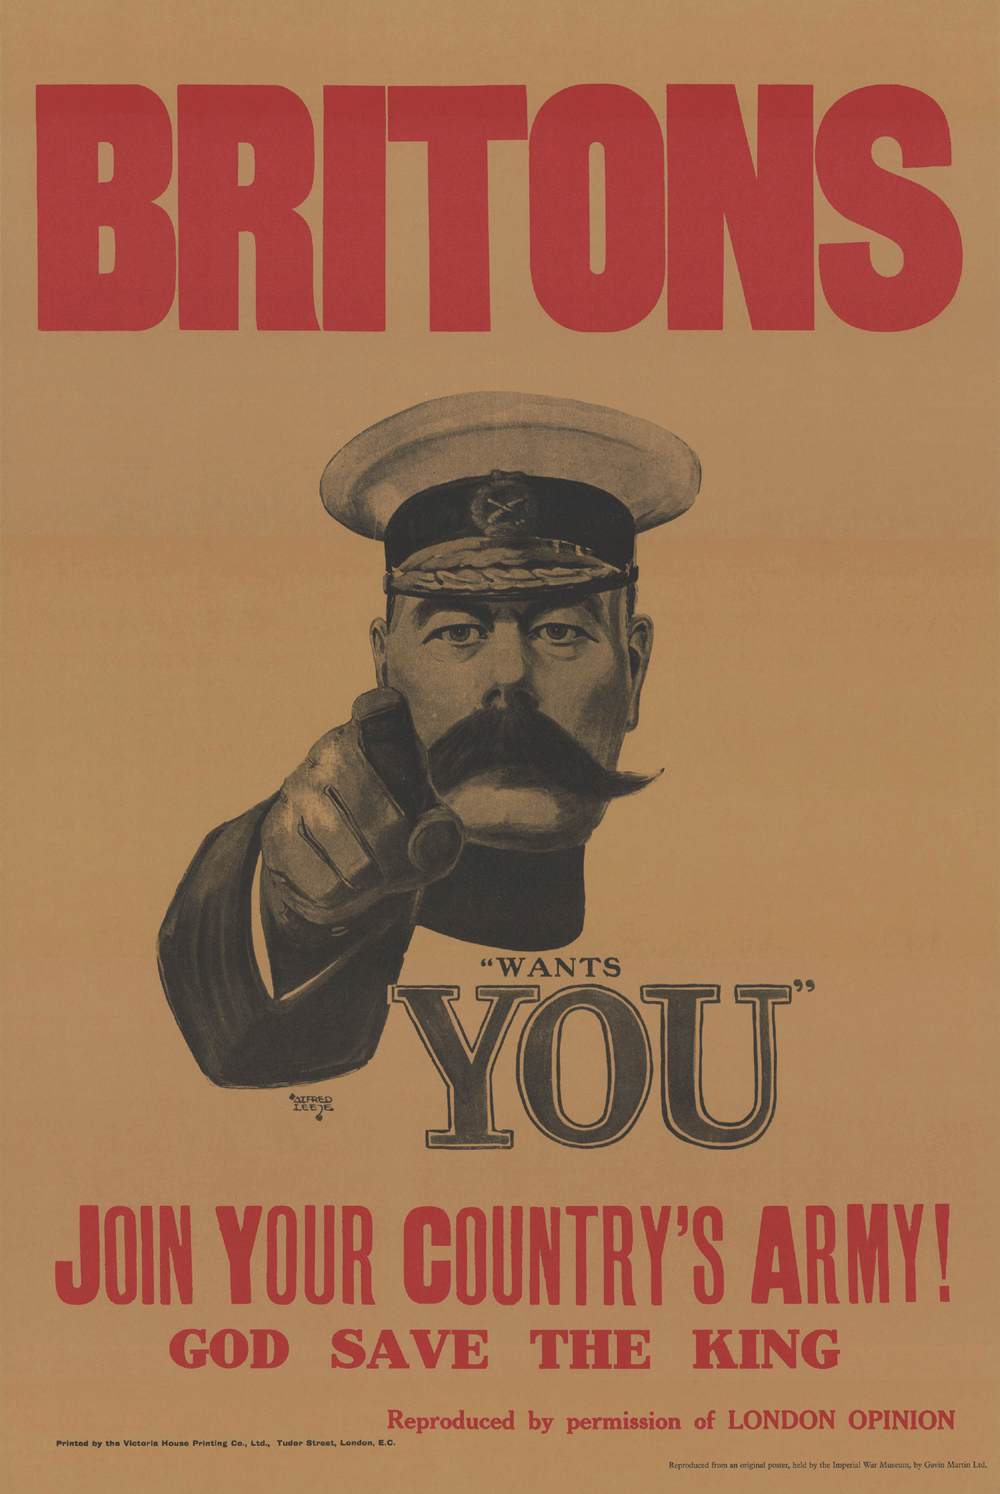 The famous Kitchener poster